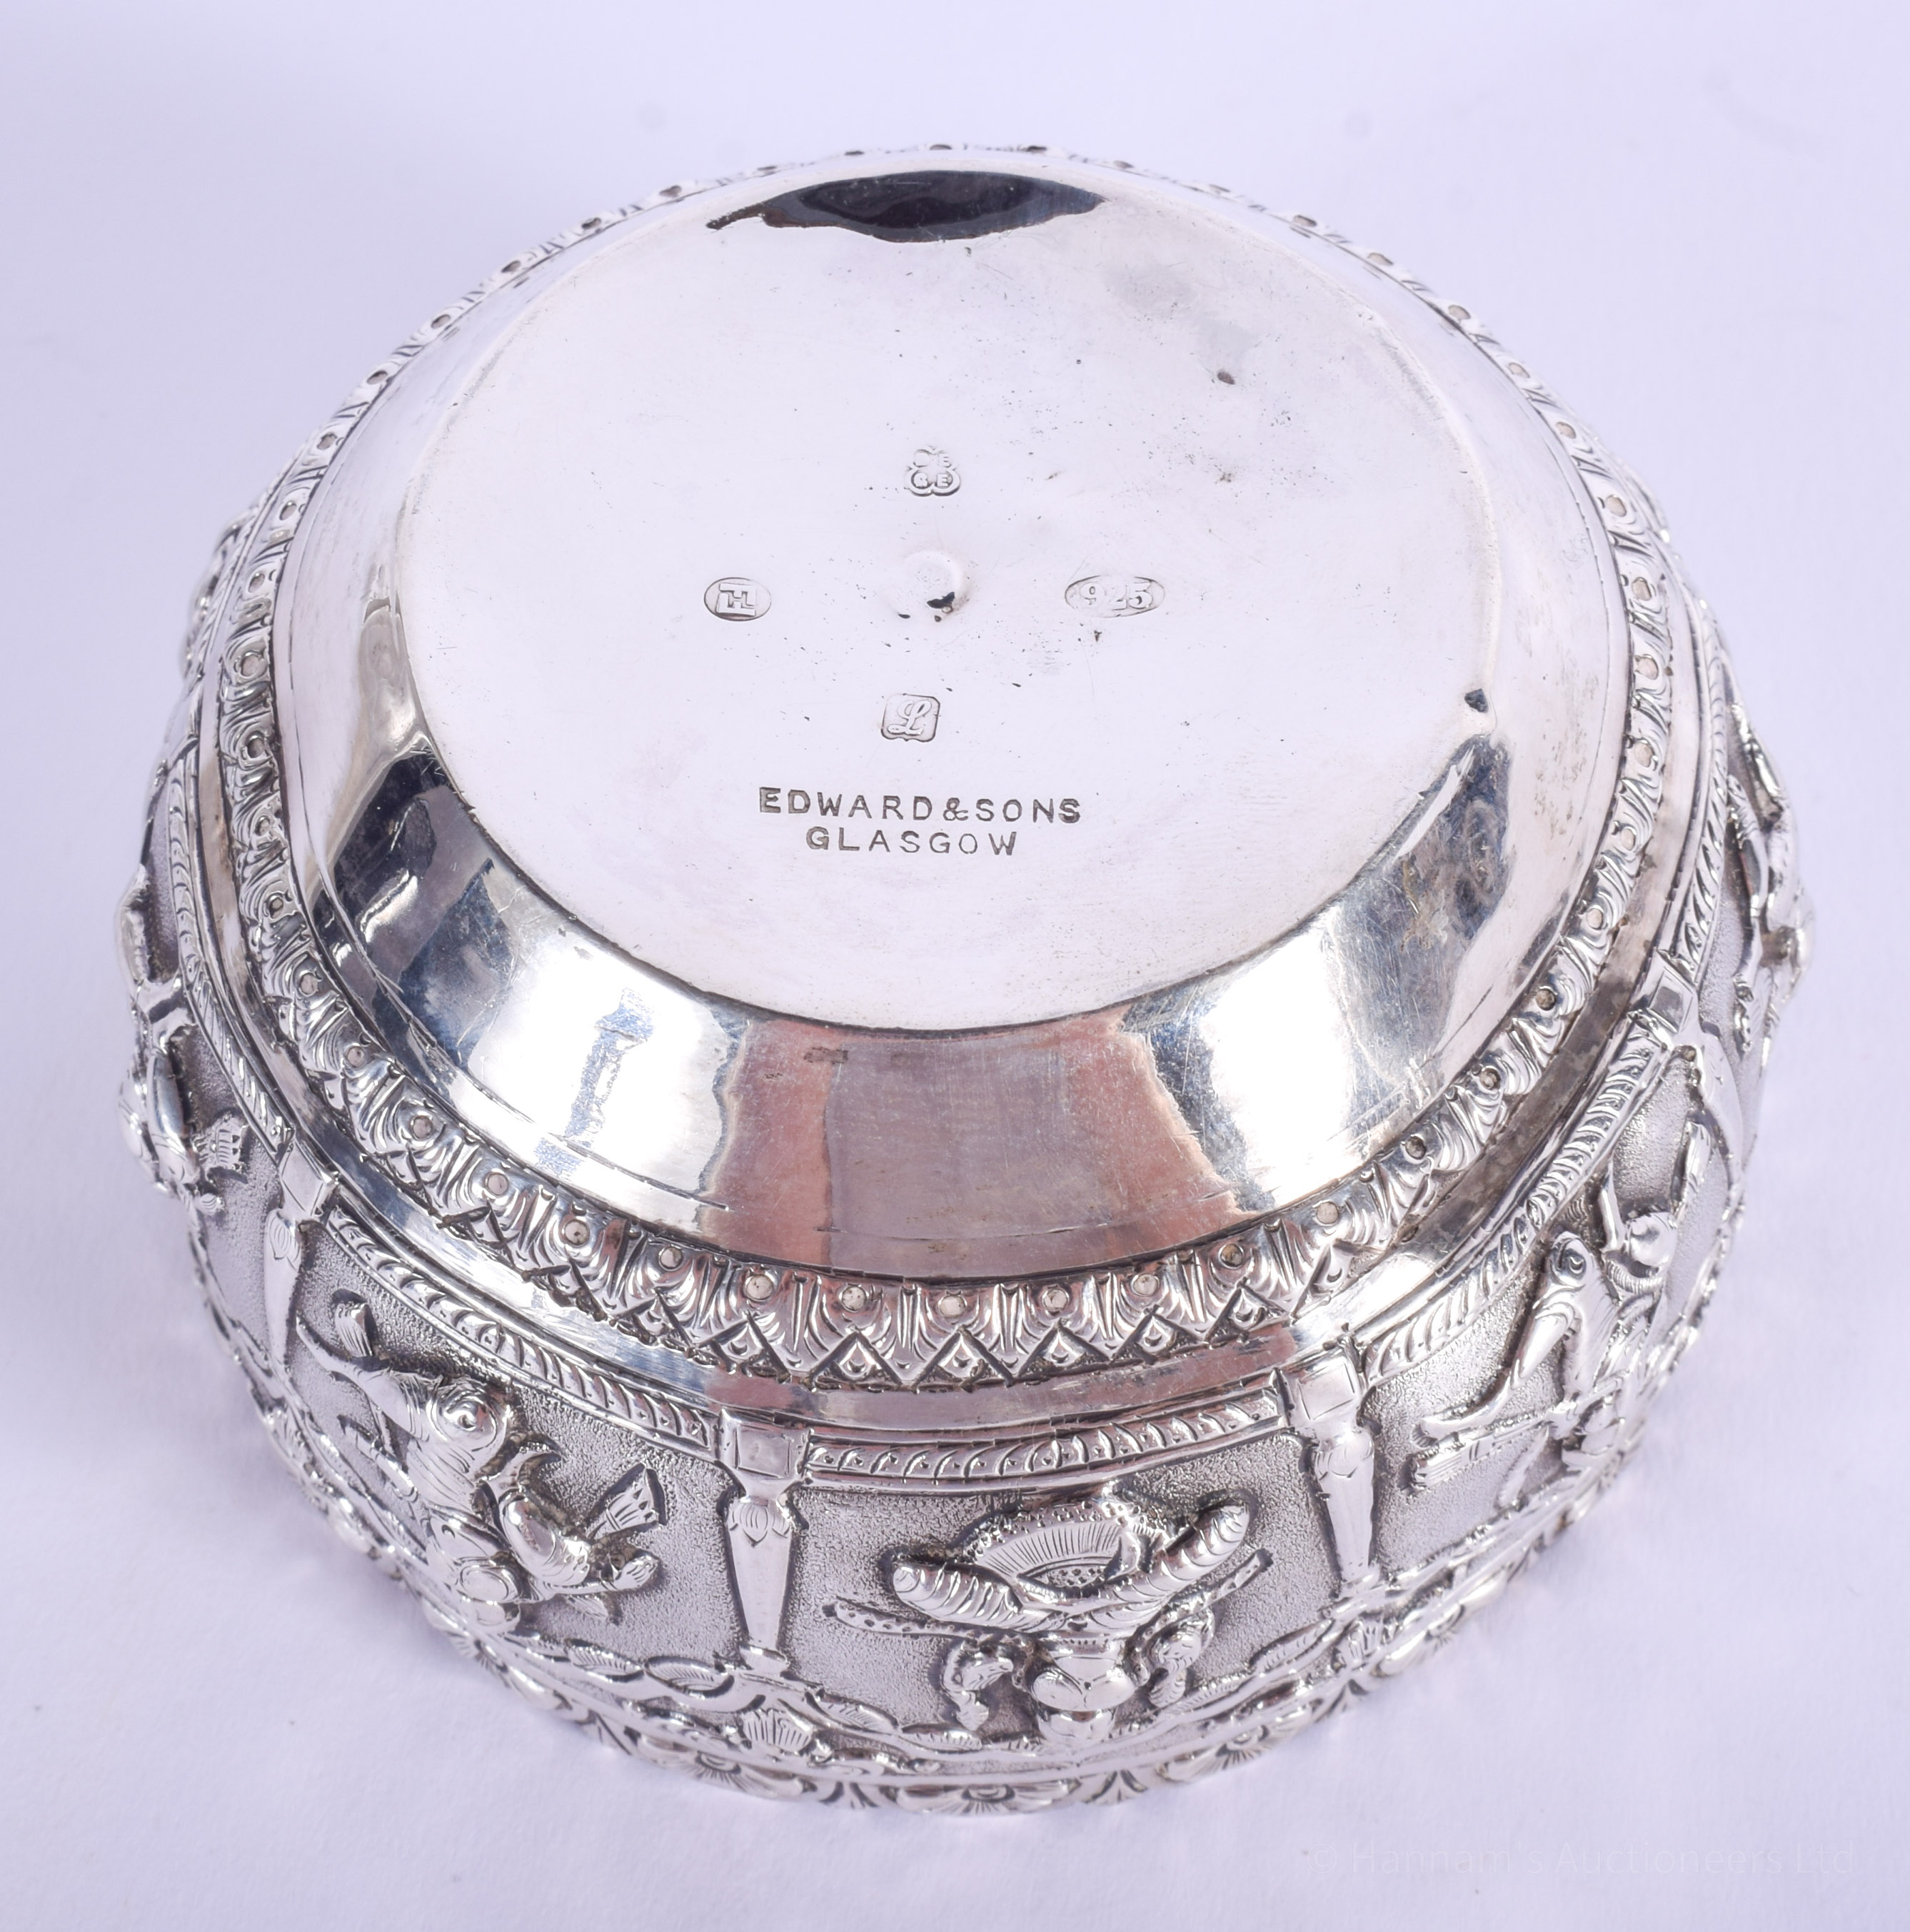 A VERY UNUSUAL ENGLISH SILVER INDIAN STYLE SUGAR BOWL. 95 grams. 9.5 cm wide. - Image 5 of 6